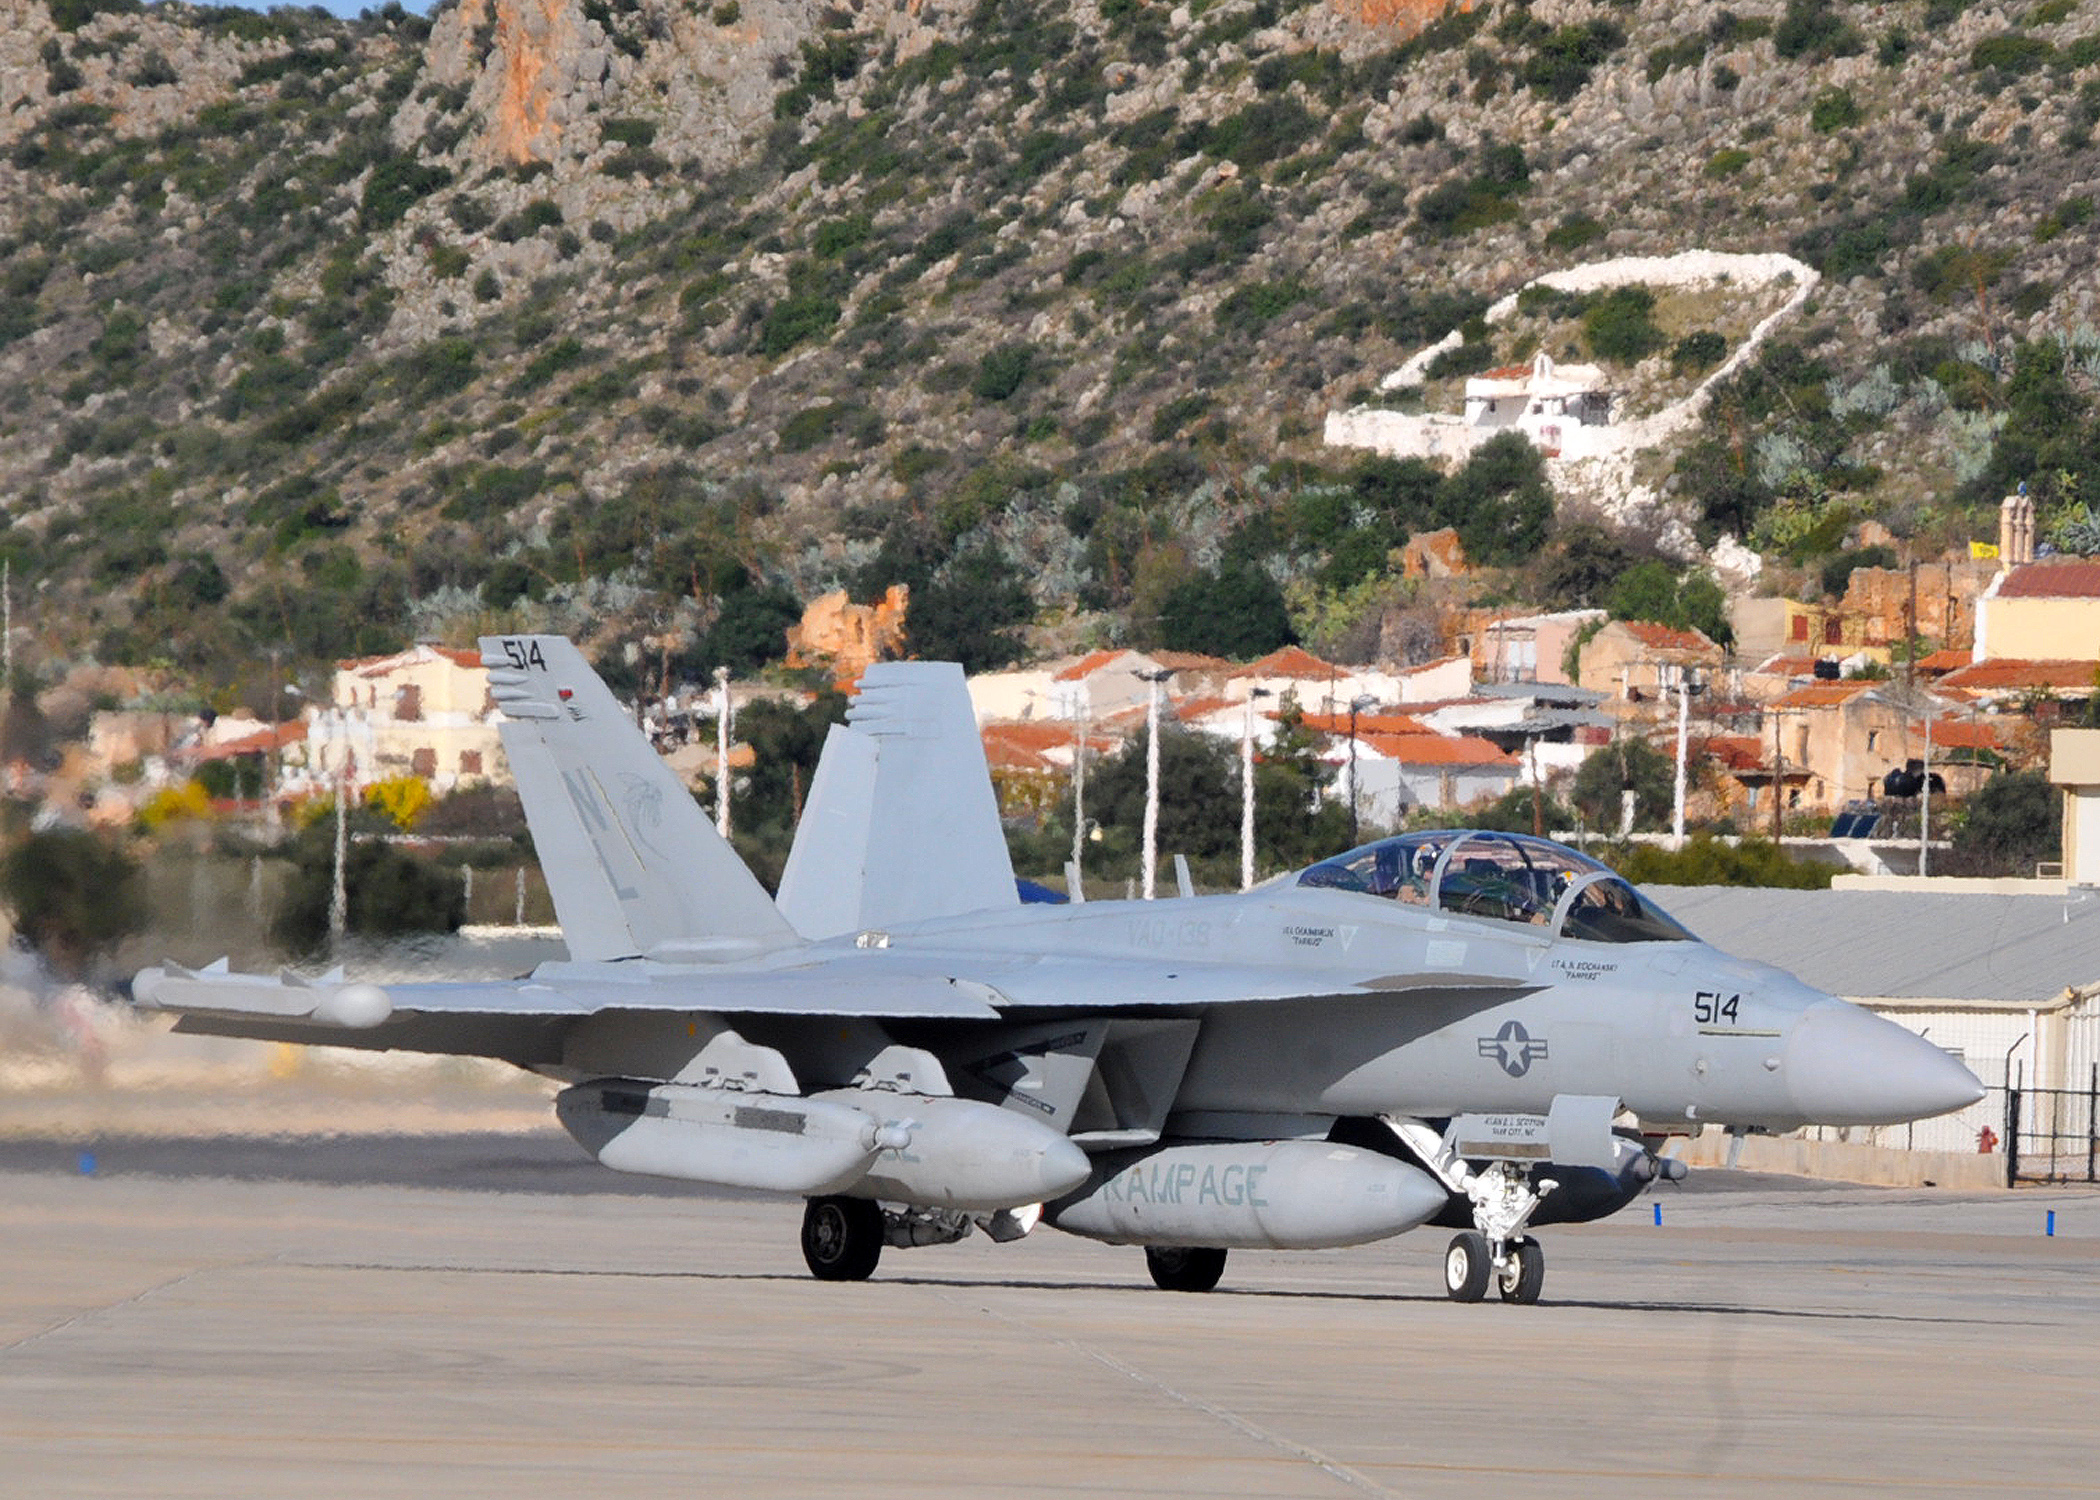 US_Navy_111220-N-MO201-140_An_EA-18G_Growler_aircraft_taxis_for_departure_following_a_transient_stop_on_Crete.jpg